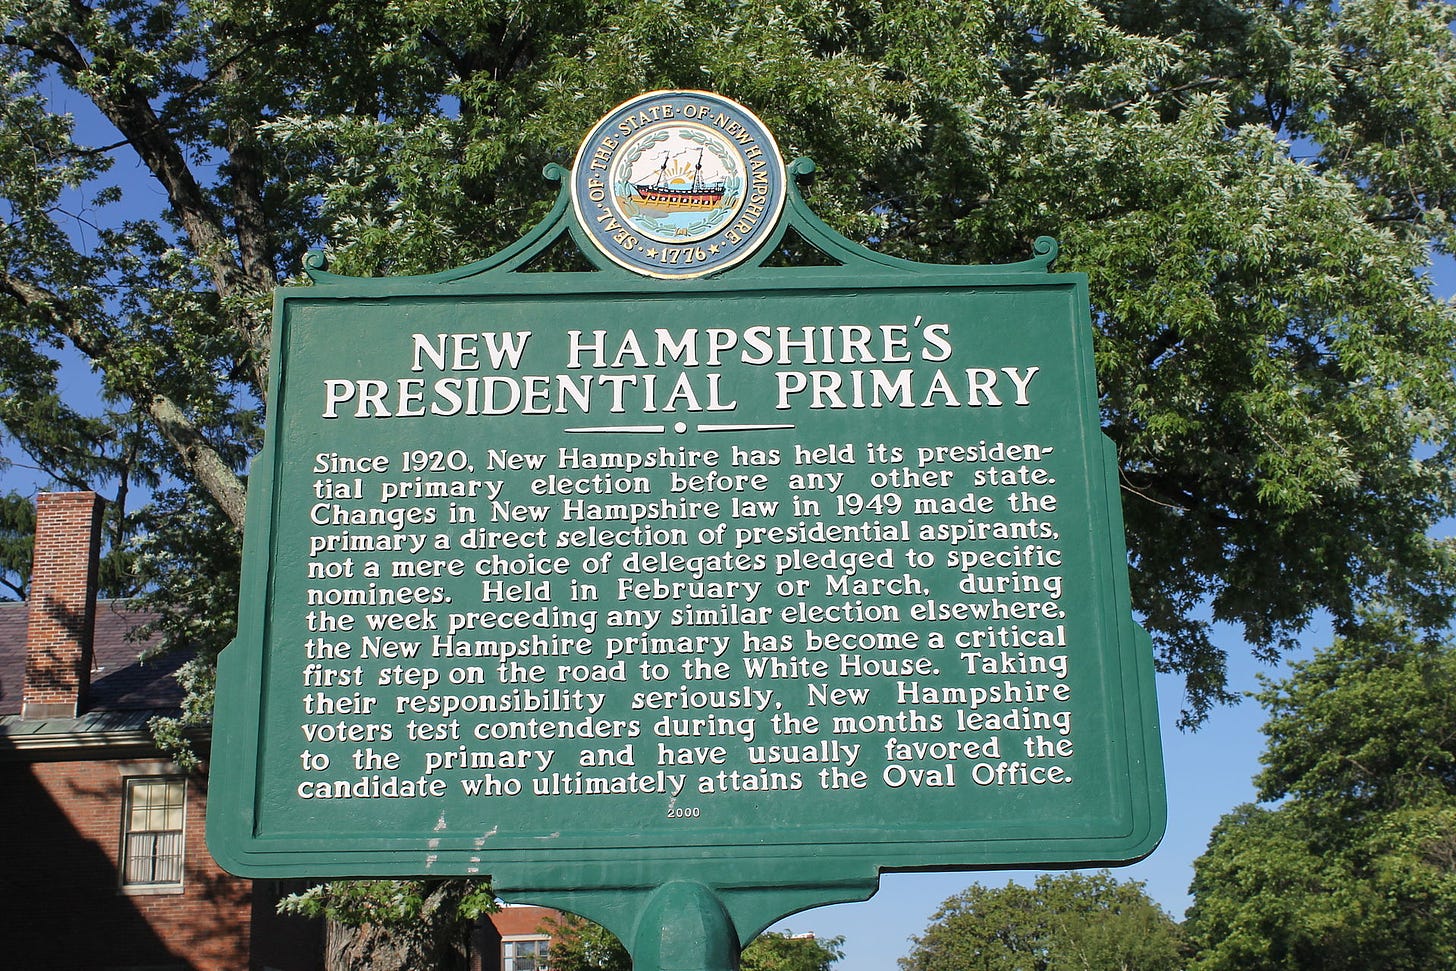 NEW HAMPSHIRE'S PRESIDENTIAL PRIMARY: Since 1920, New Hampshire has held its presidential primary election before any other state. Changes in New Hampshire law in 1949 made the primary a direct selection of presidential aspirants, not a mere choice of delegates pledged to specific nominees. Held in February or March, during the week preceding any similar election elsewhere, the New Hampshire primary has become a critical first step on the road to the White House. Taking their responsibility seriously. New Hampshire voters test contenders during the months leading to the primary and have usually favored the candidate who ultimately attains the Oval Office.